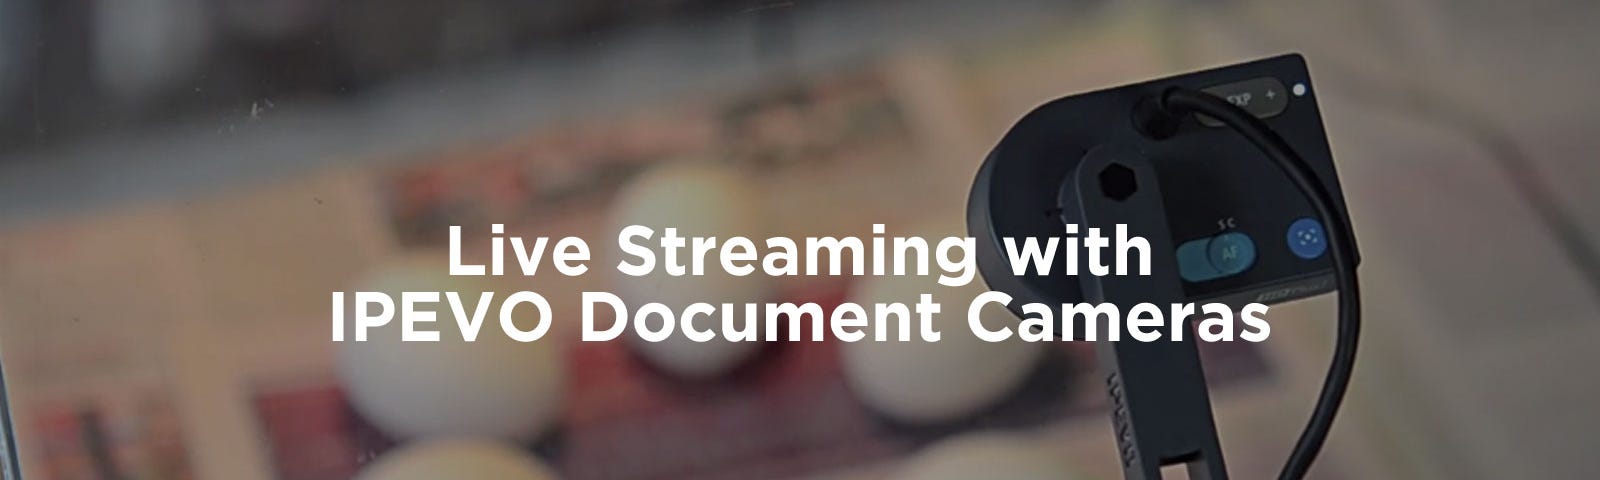 Live Streaming with IPEVO Document Cameras